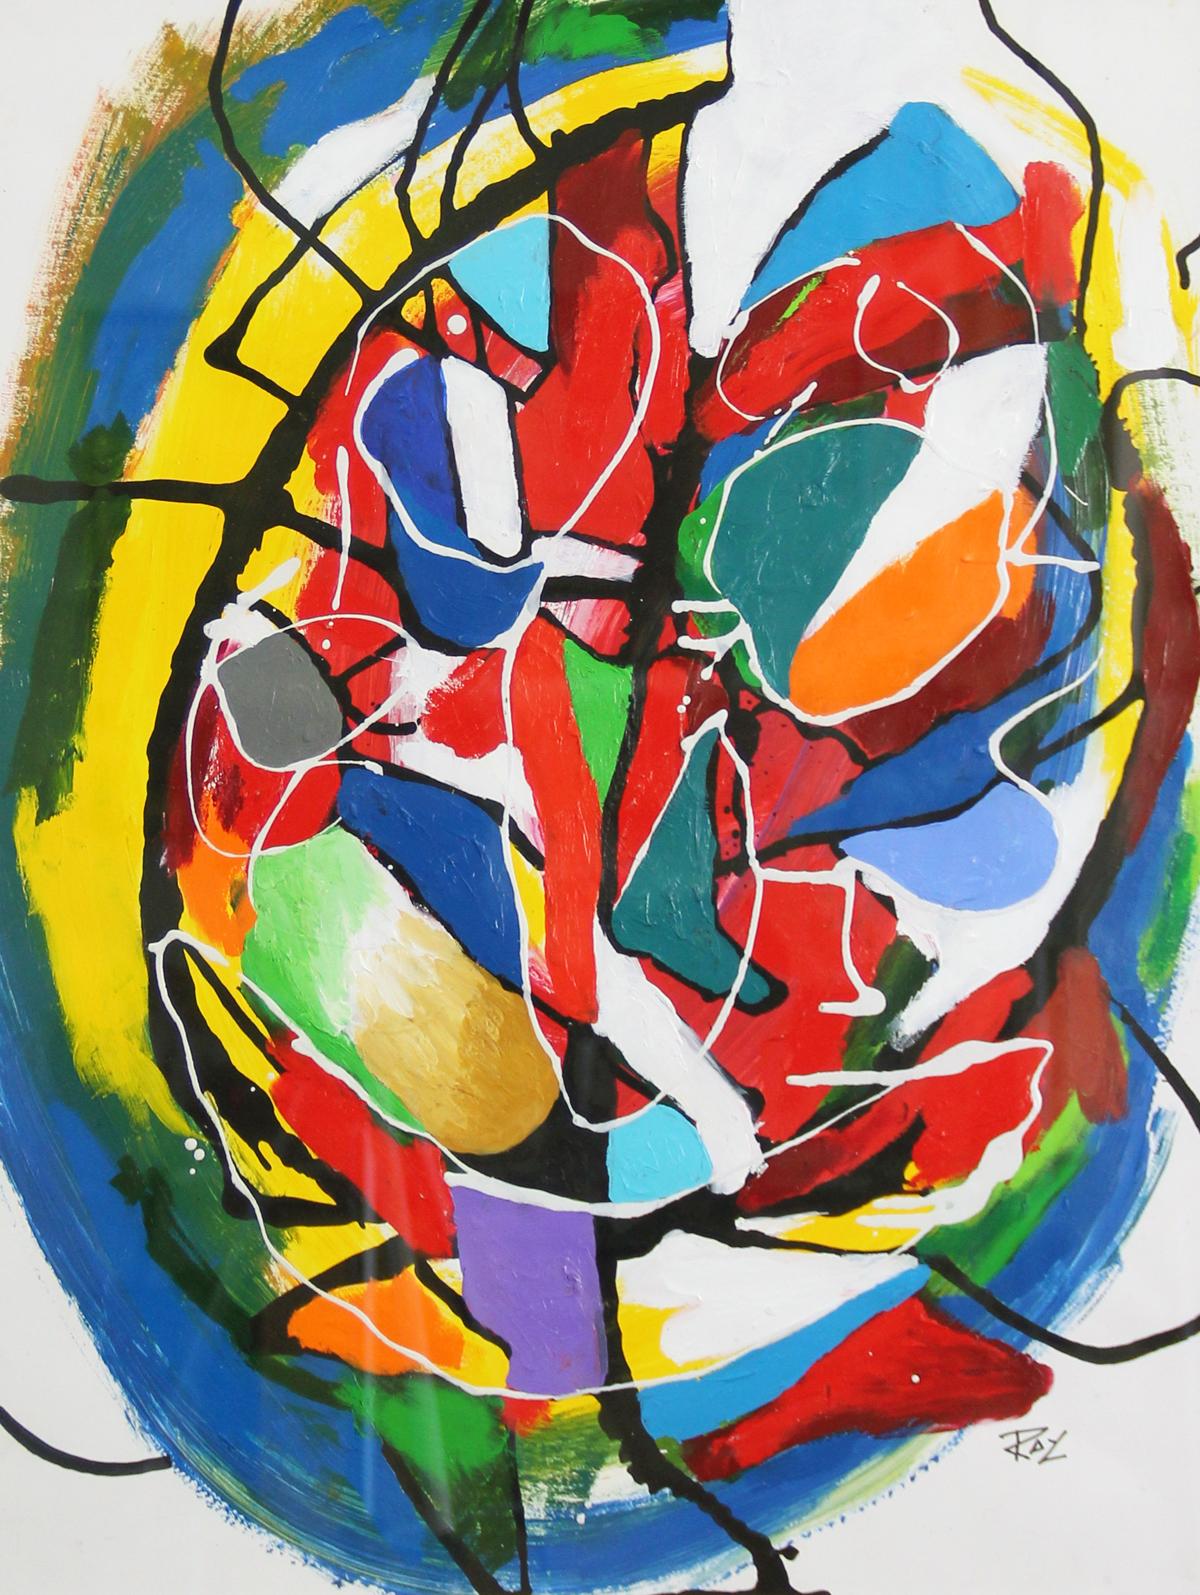 Cerebral, Color Abstraction, Acrylic on Paper, Modernist Abstract, 1995